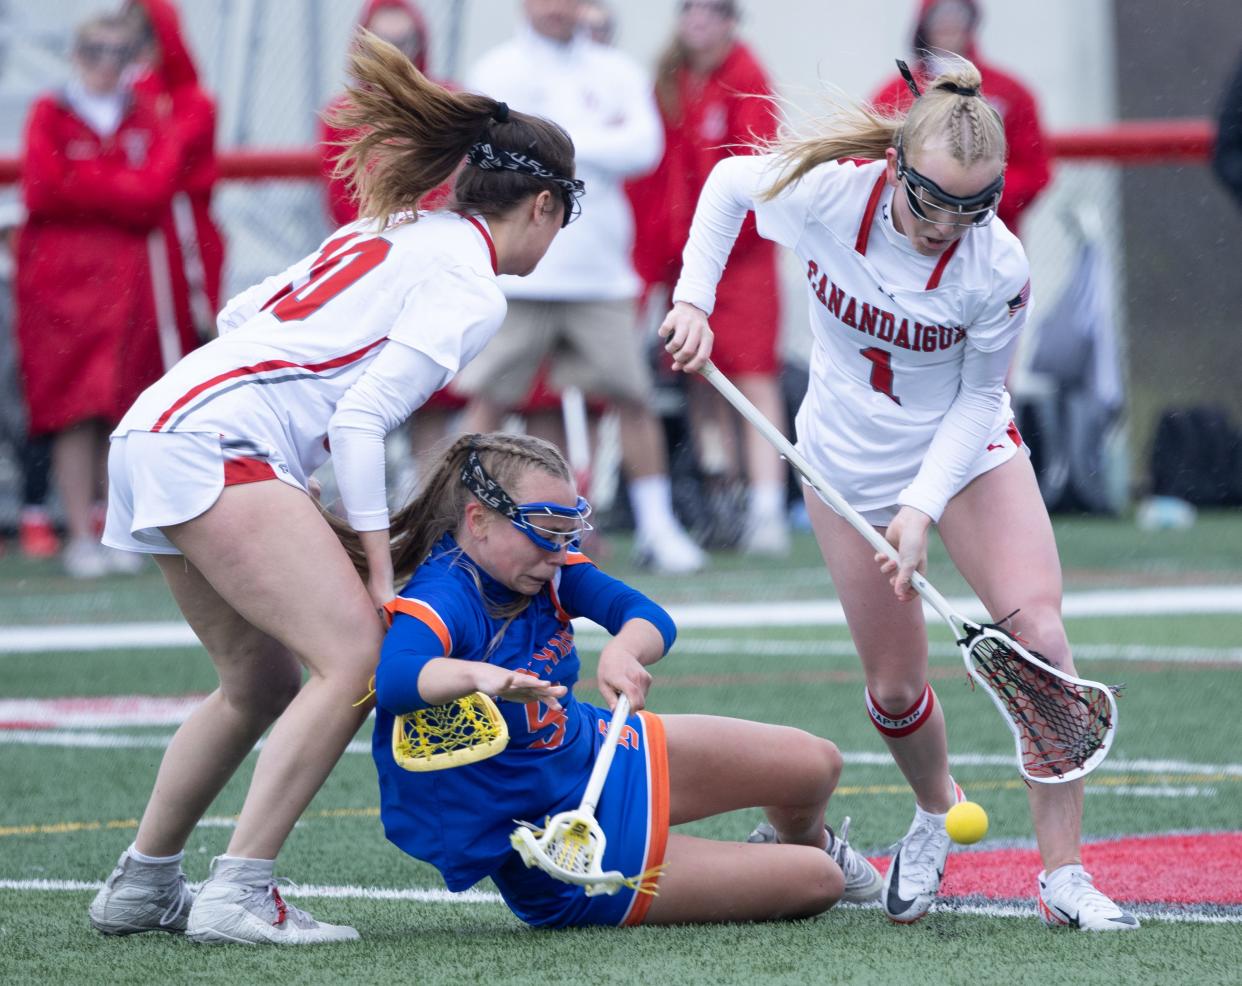 Canandaigua's Hanna Davis, right, wins a draw control while Penn Yan's Taylor Mullins is knocked to the turf by Abigail Cangemi.